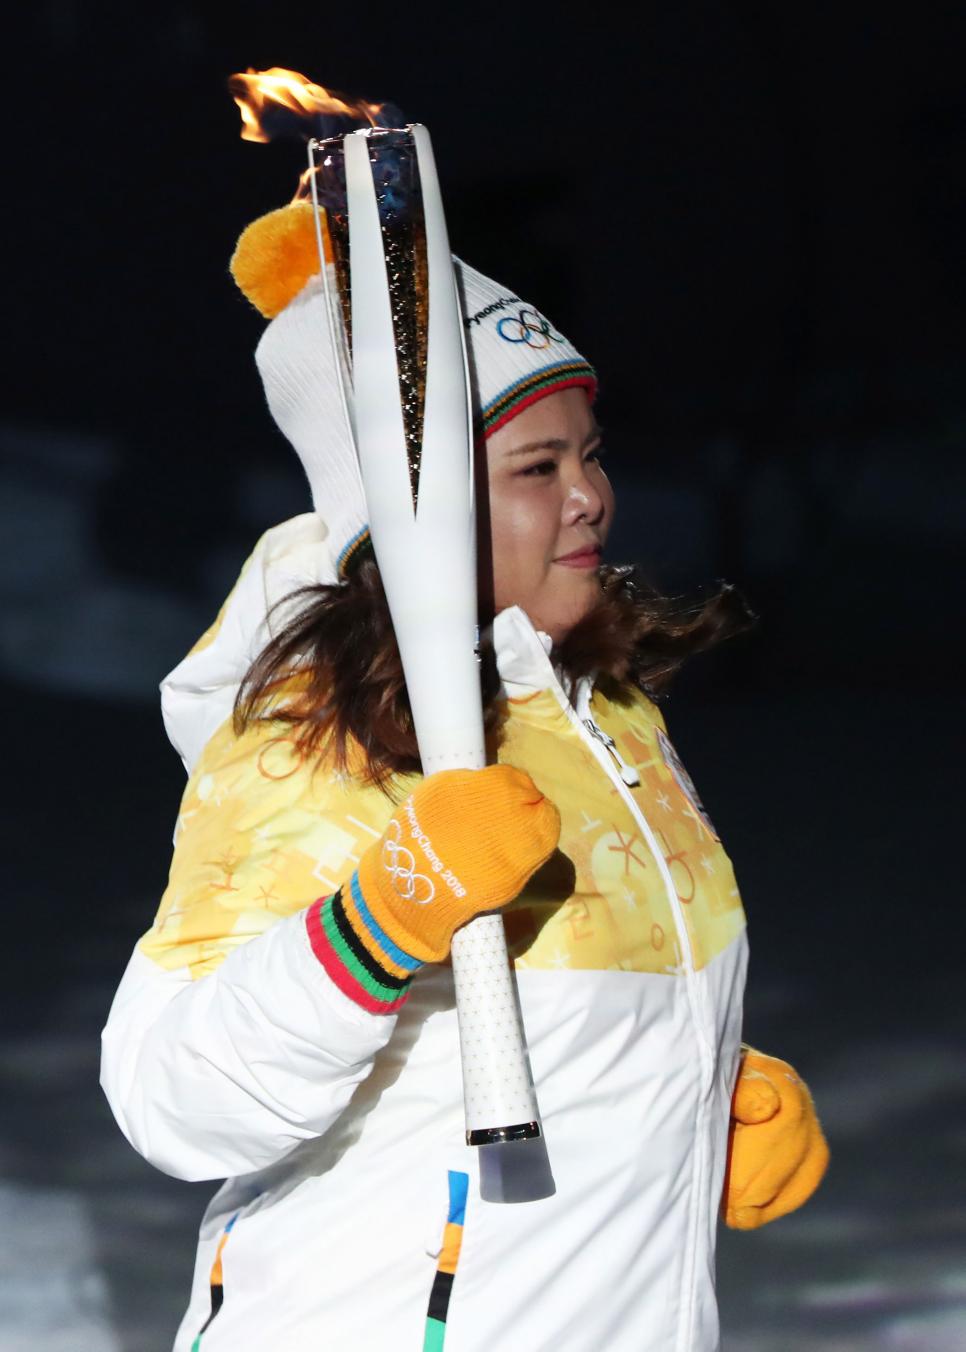 Opening ceremony of Winter Olympic Games in Pyeongchang, South Korea